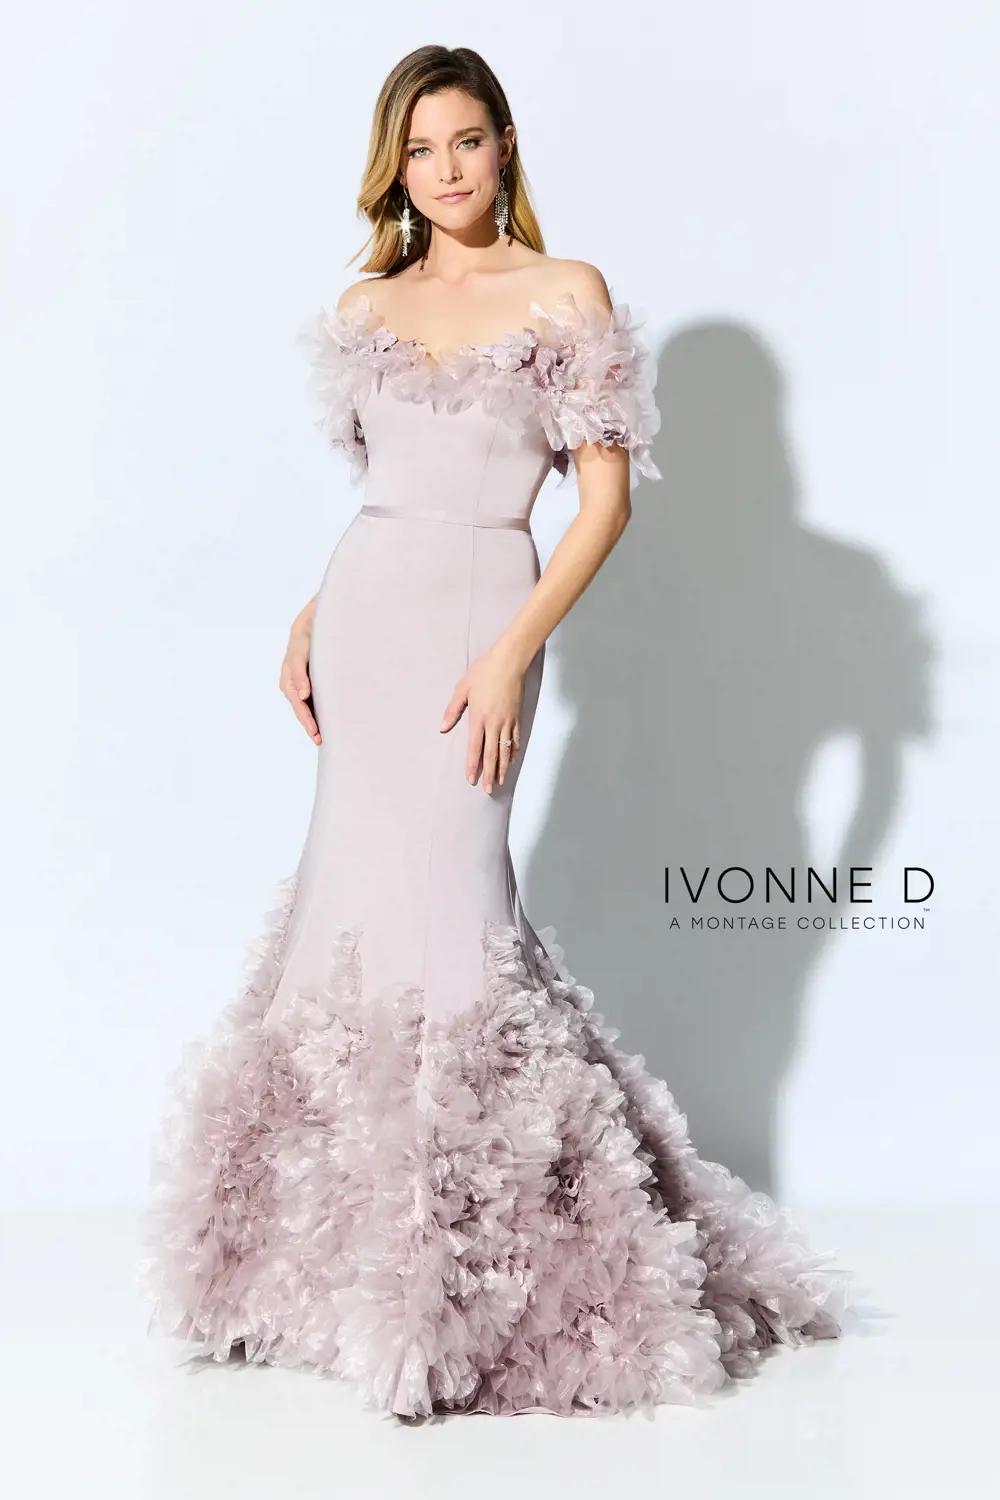 mother of the bride wedding dresses